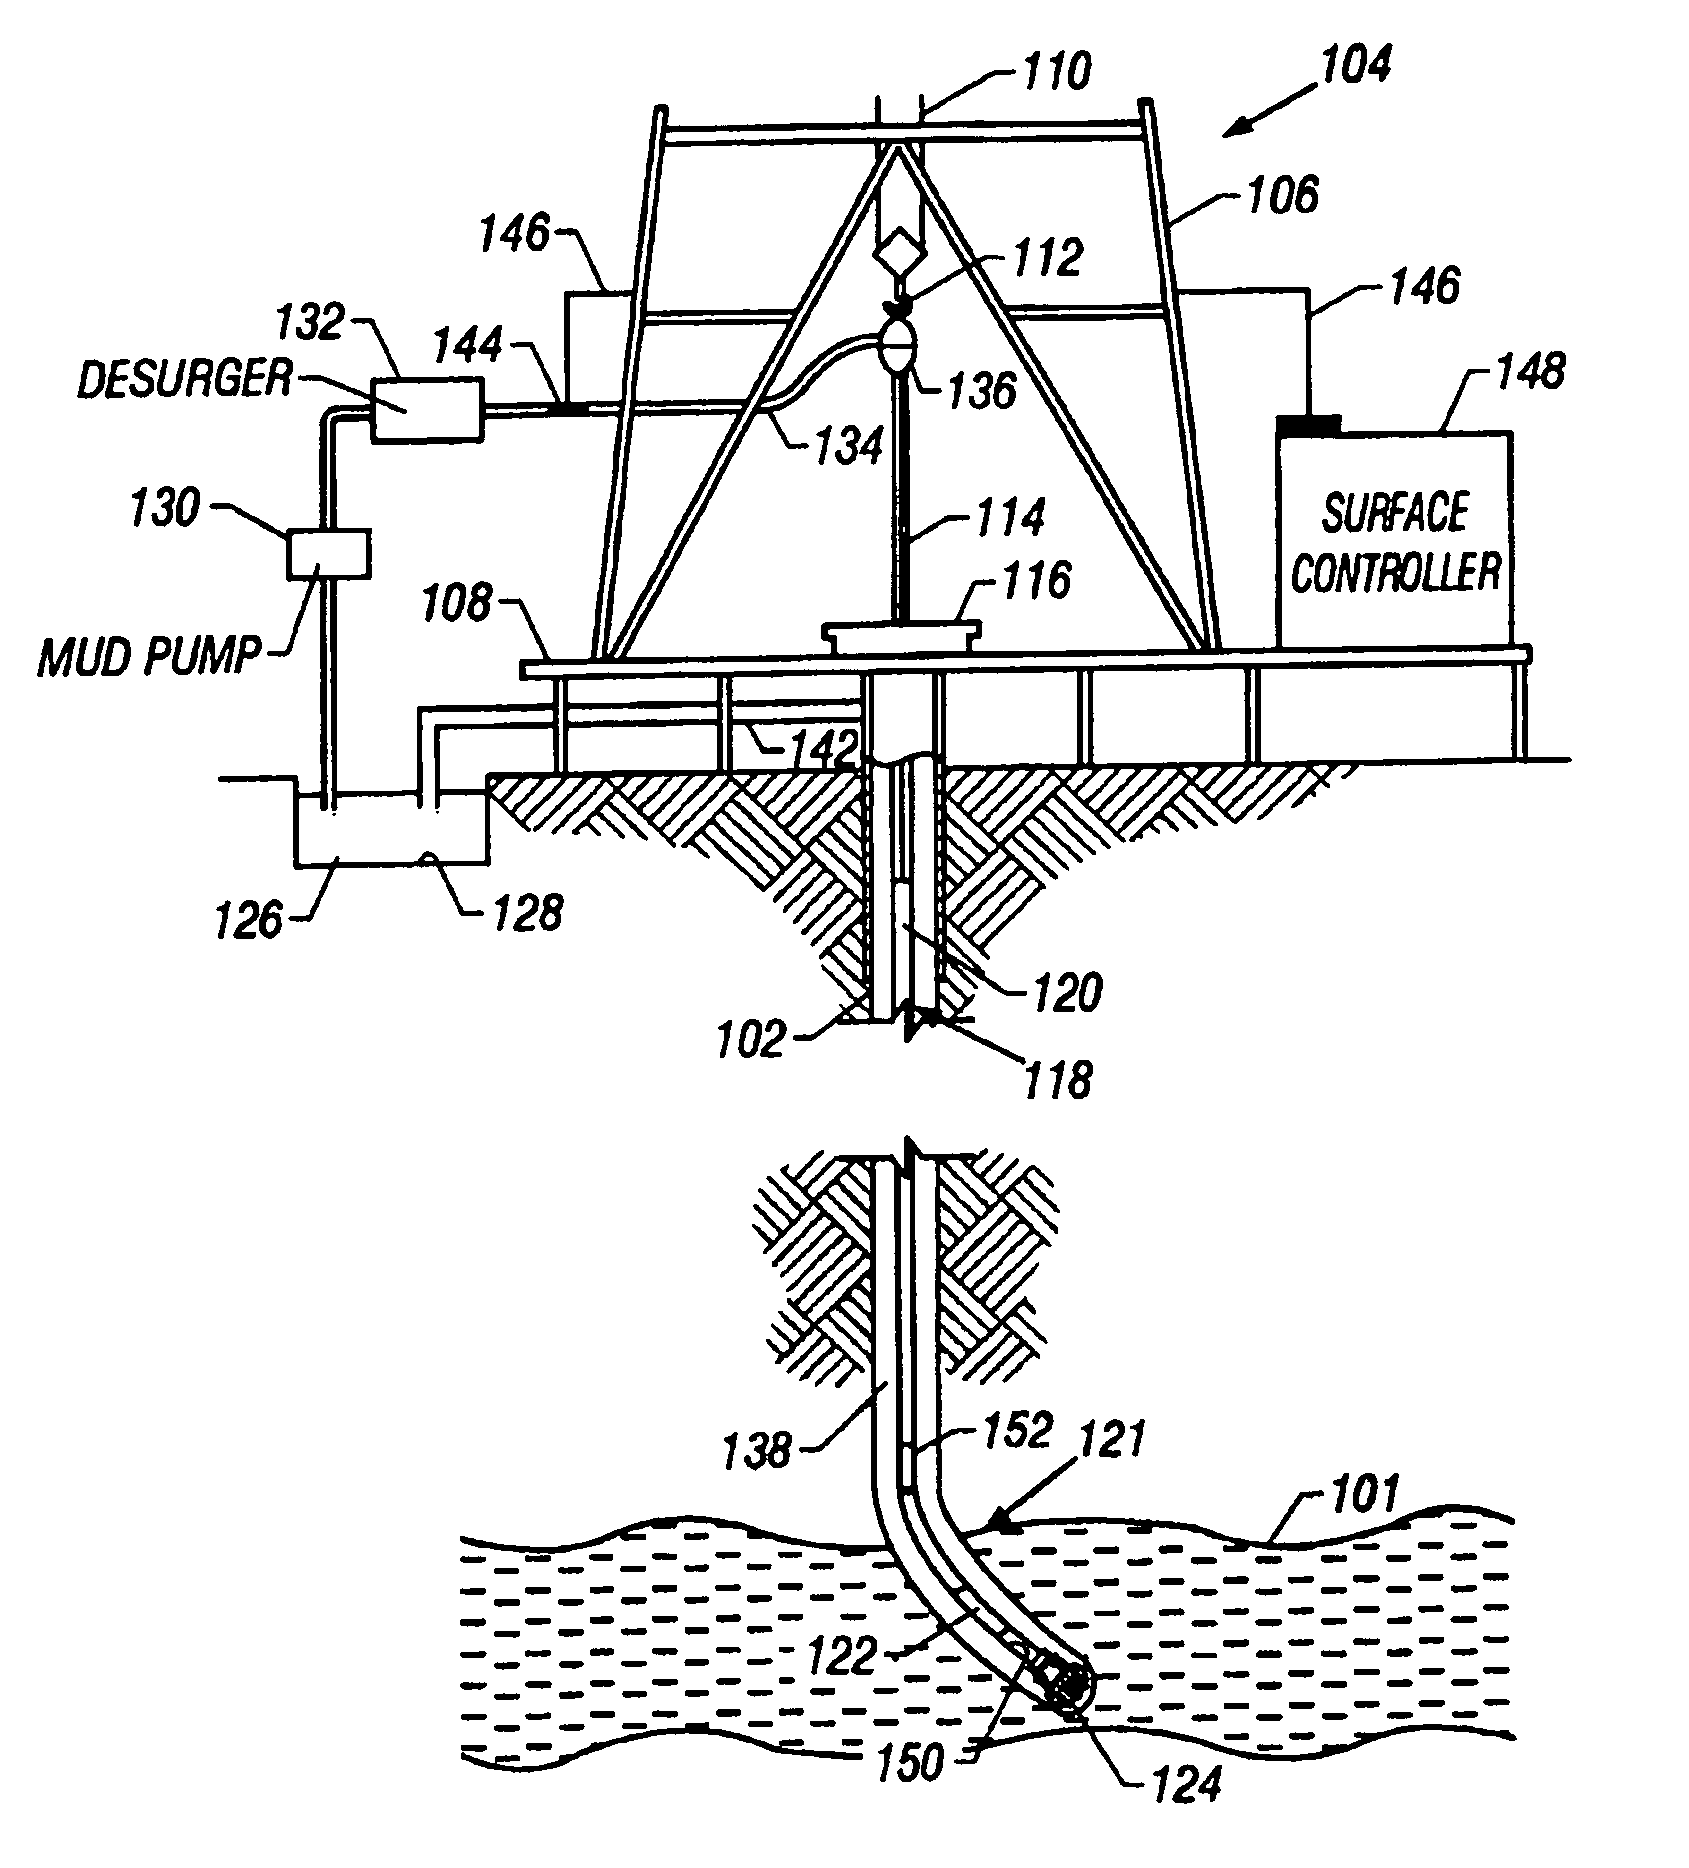 Apparatus and method for mechanical caliper measurements during drilling and logging-while-drilling operations